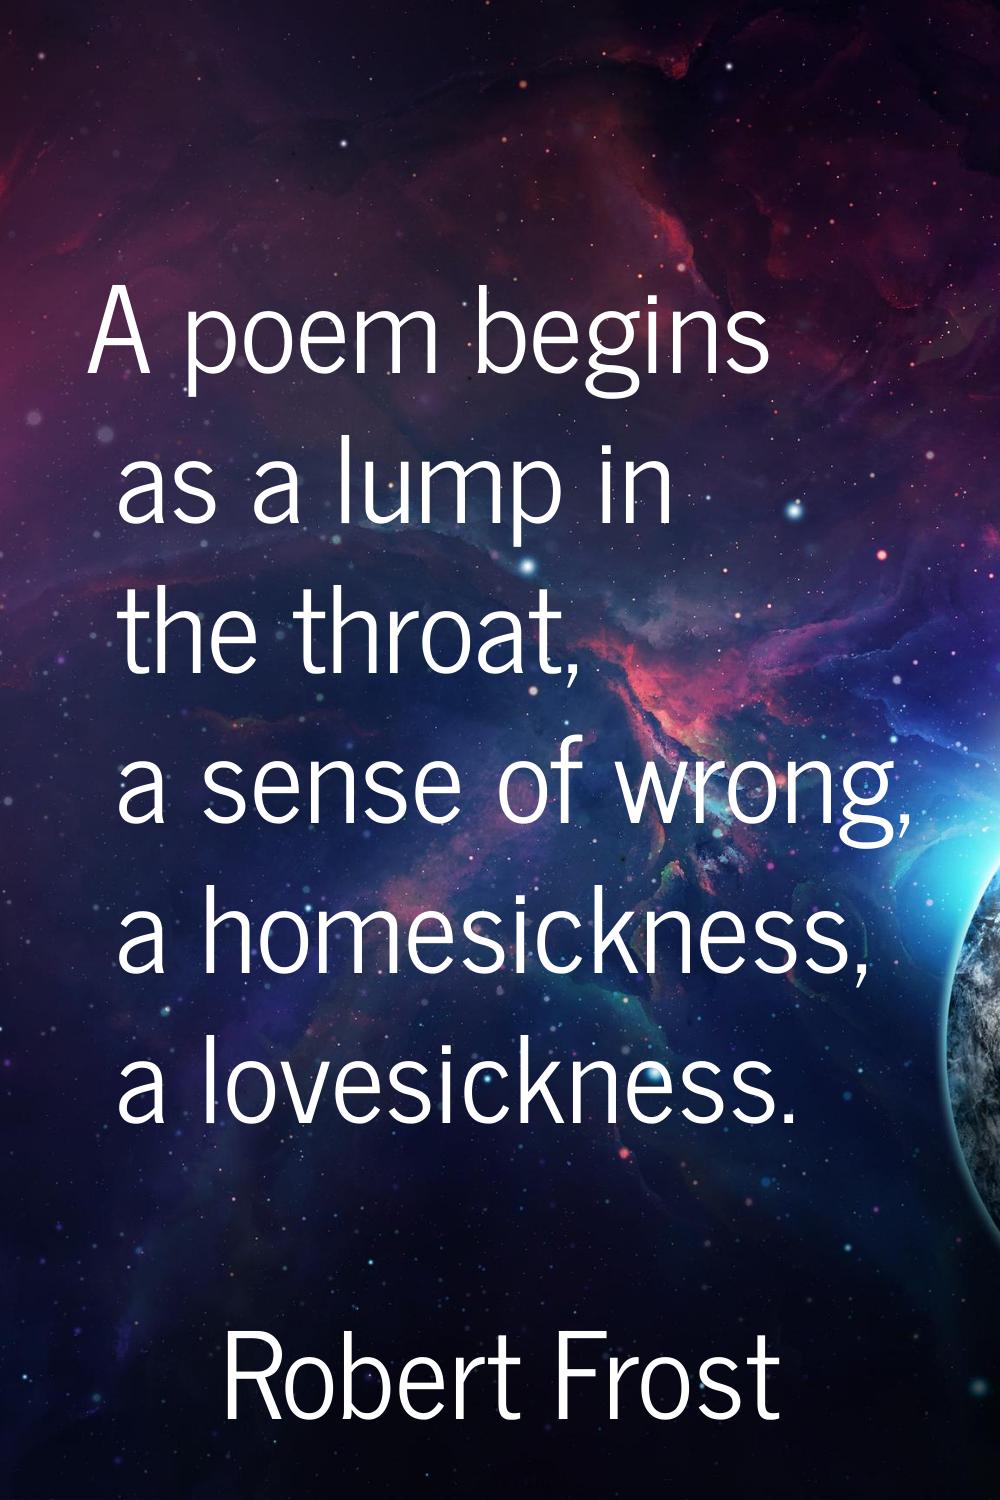 A poem begins as a lump in the throat, a sense of wrong, a homesickness, a lovesickness.